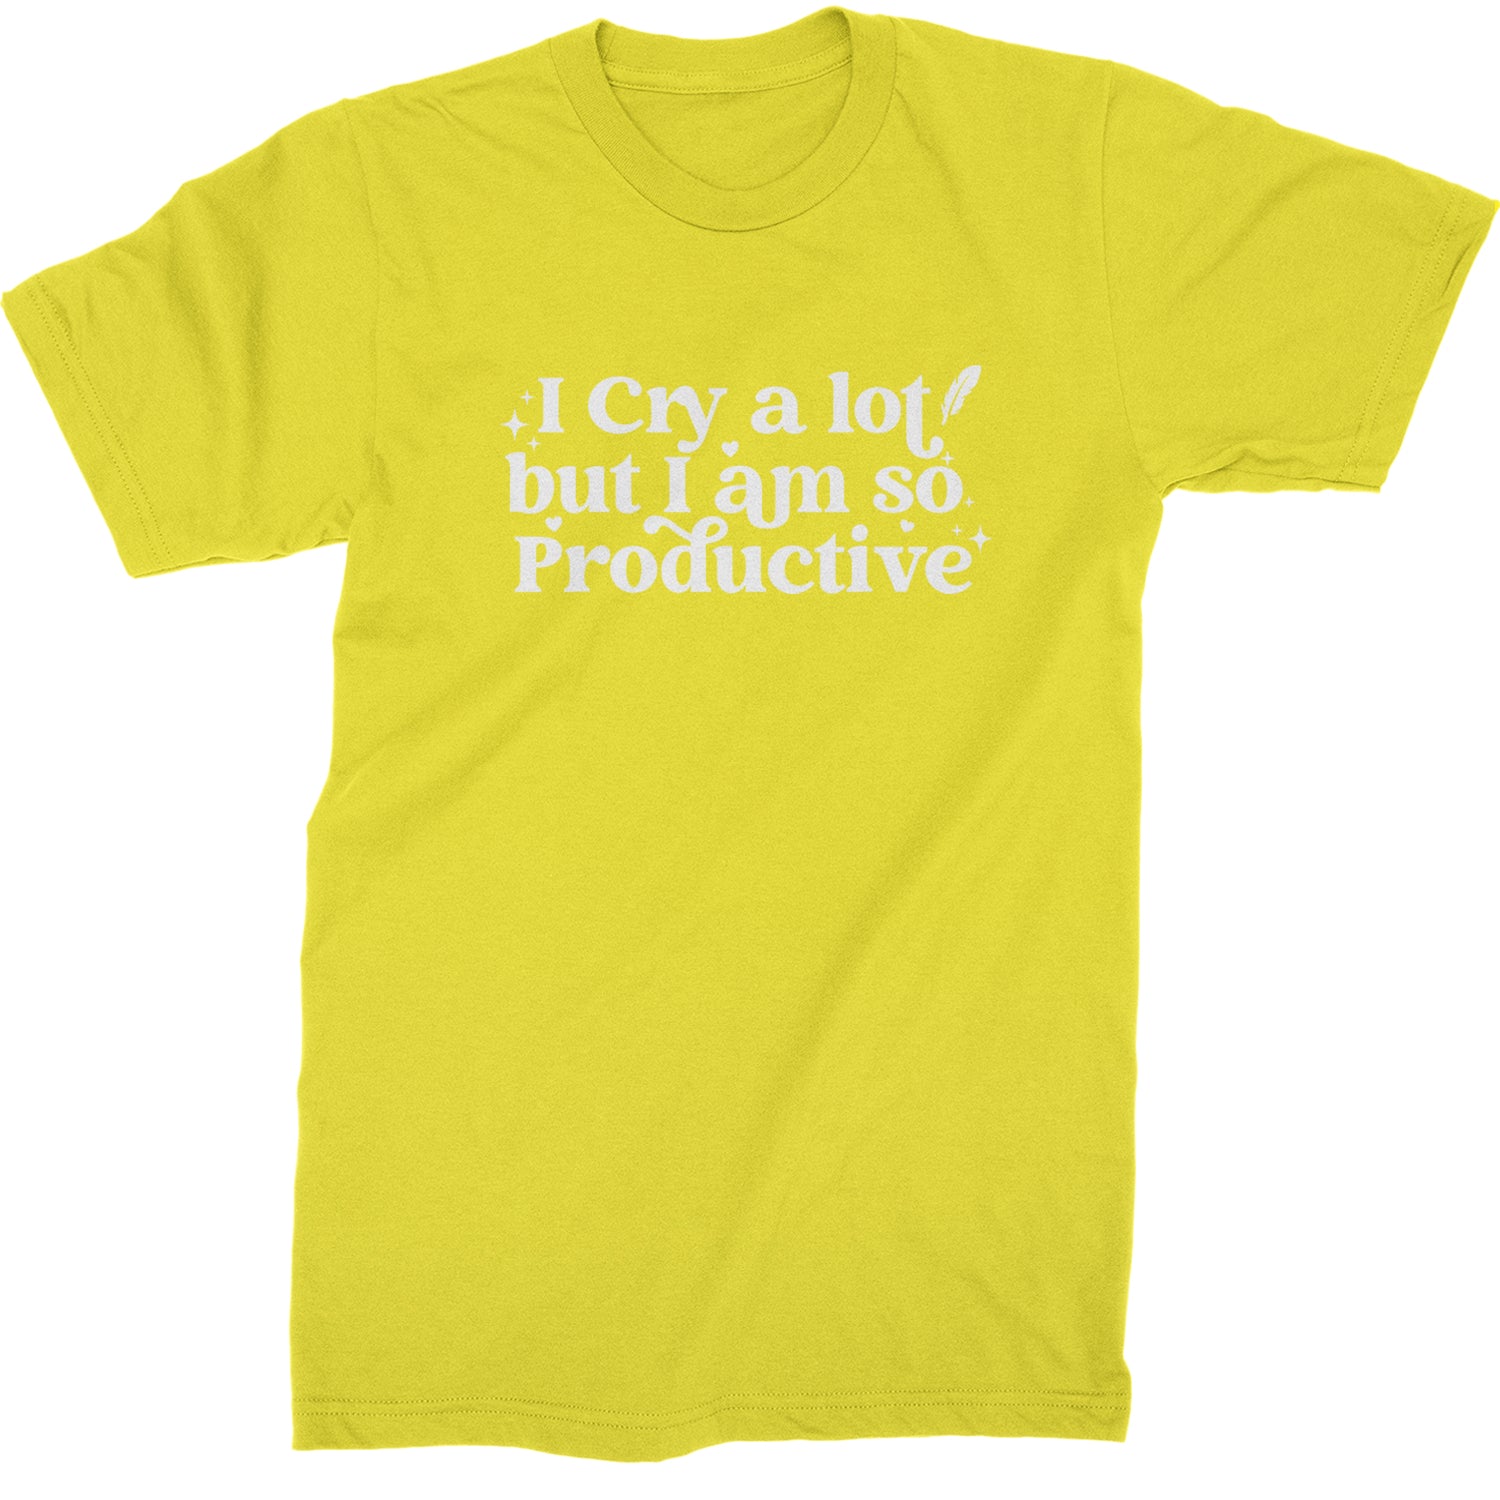 I Cry A Lot But I am So Productive TTPD Mens T-shirt Yellow